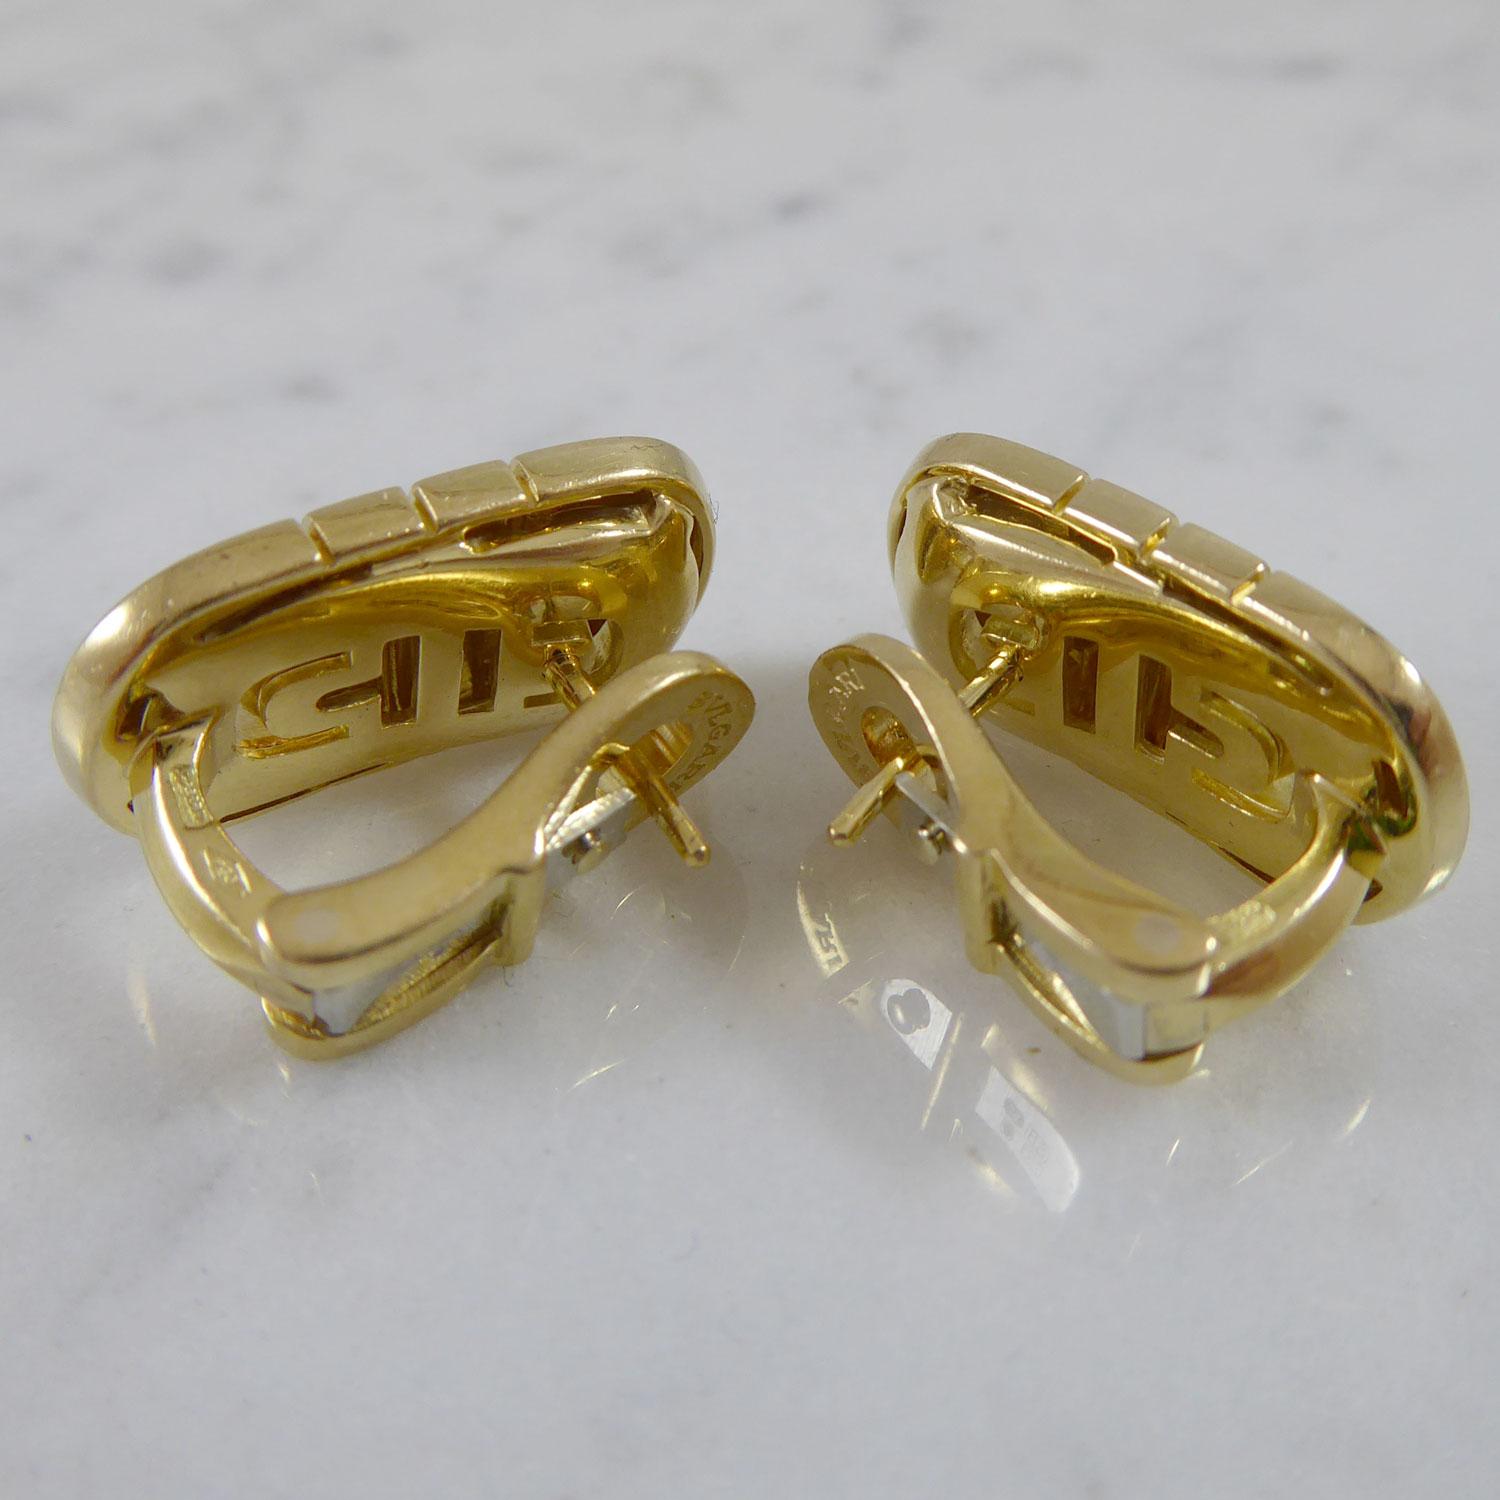 Vintage gold earrings from Bulgari crafted in 18ct yellow gold.  In the iconic Parentesi design, the earringes are a rectangular shape with D shaped ends.  With a post for pierced ear fitting and a hinged clip catch which is stamped 